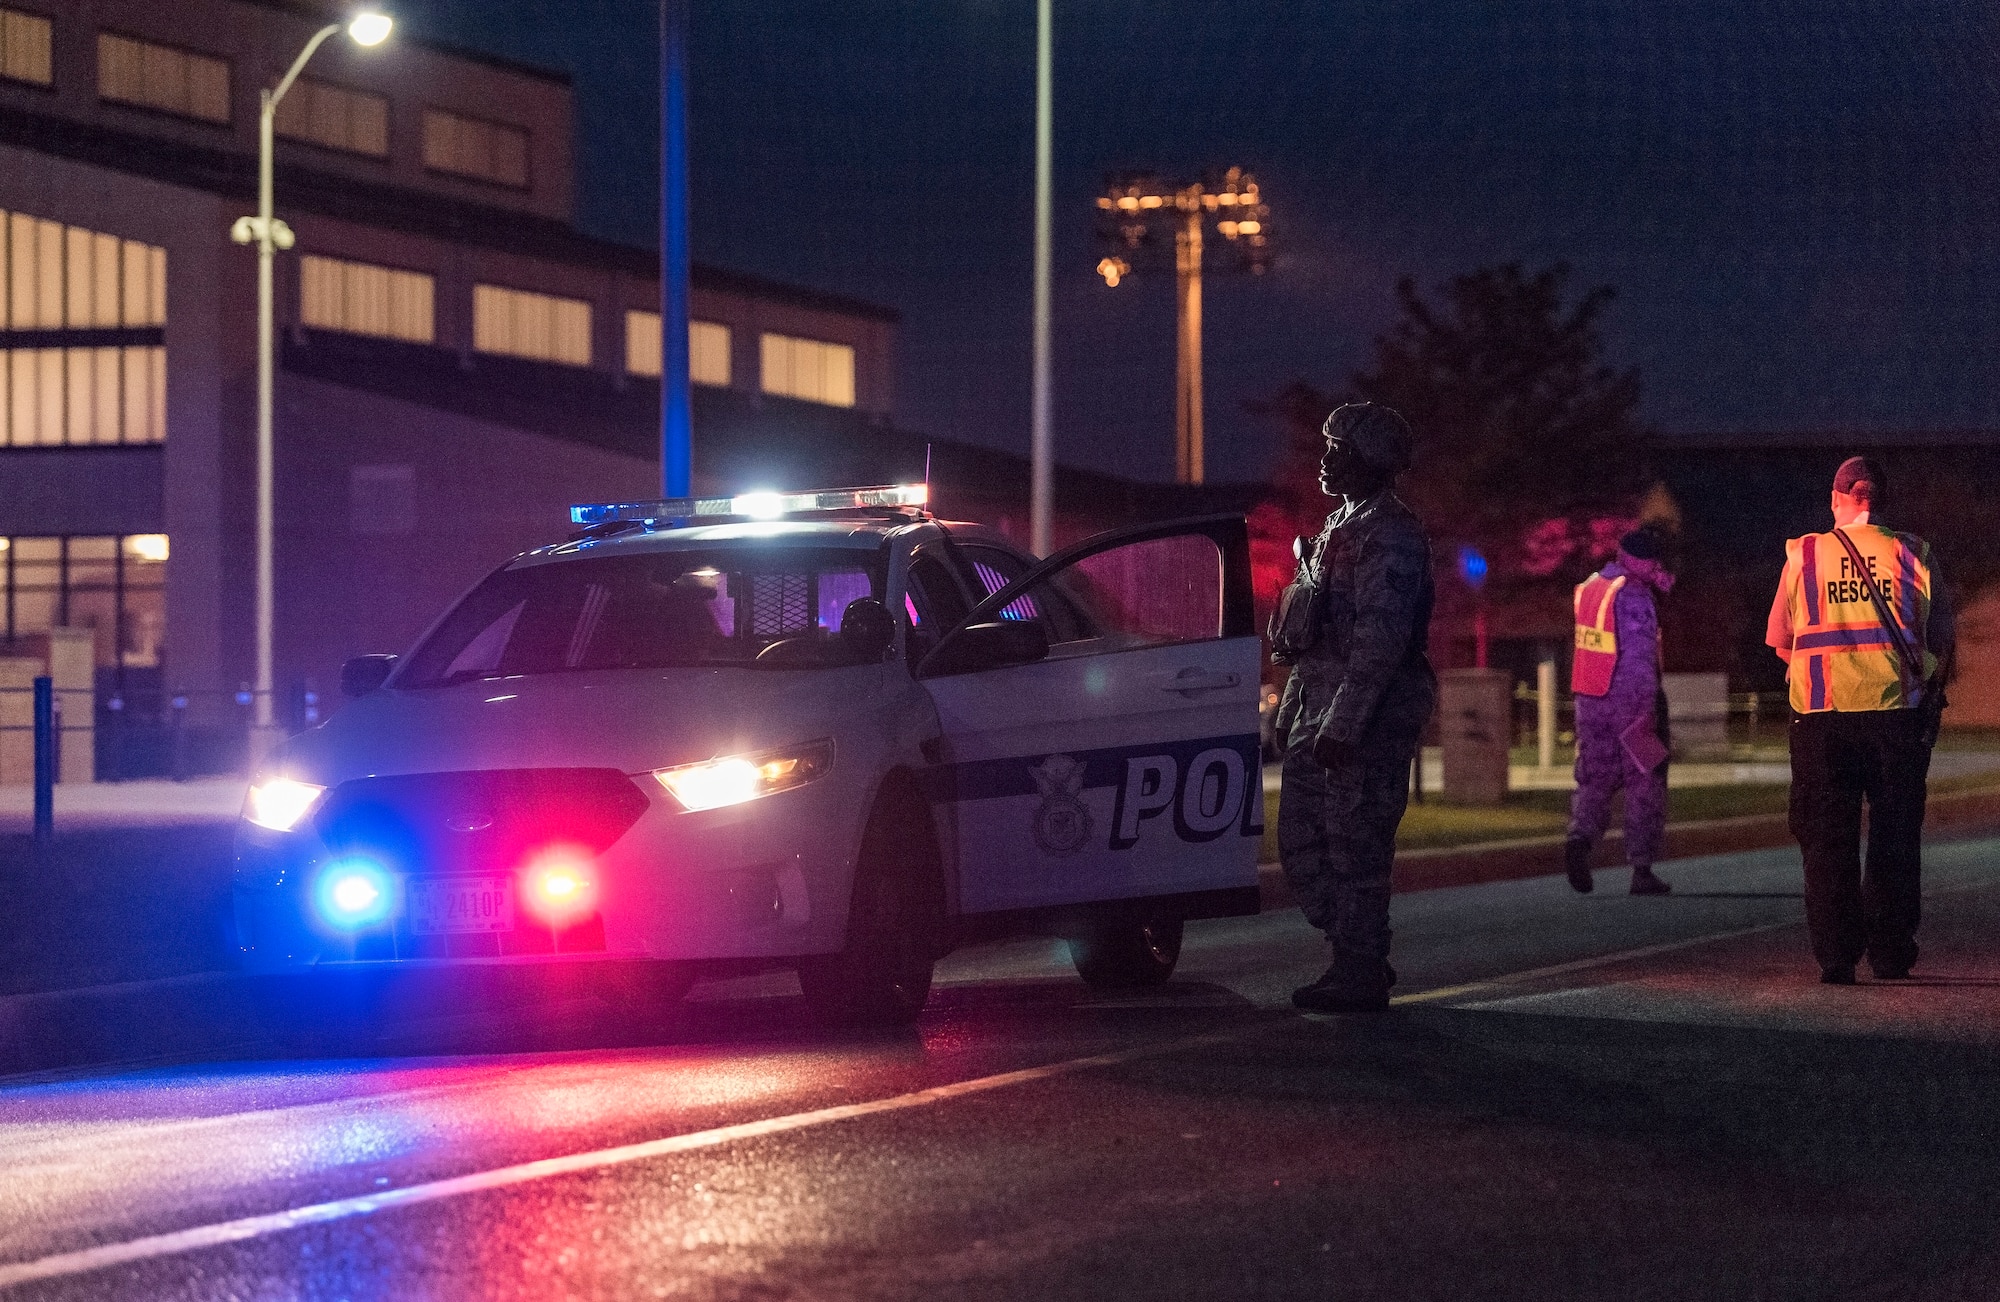 A 436th Security Forces Squadron response force member responds to a simulated bomb threat at the Command Post building Sept. 17, 2018, on Dover Air Force Base, Del. Wing Inspection Team members observed and evaluated the evacuation and actions taken by first responders. (U.S. Air Force photo by Roland Balik)